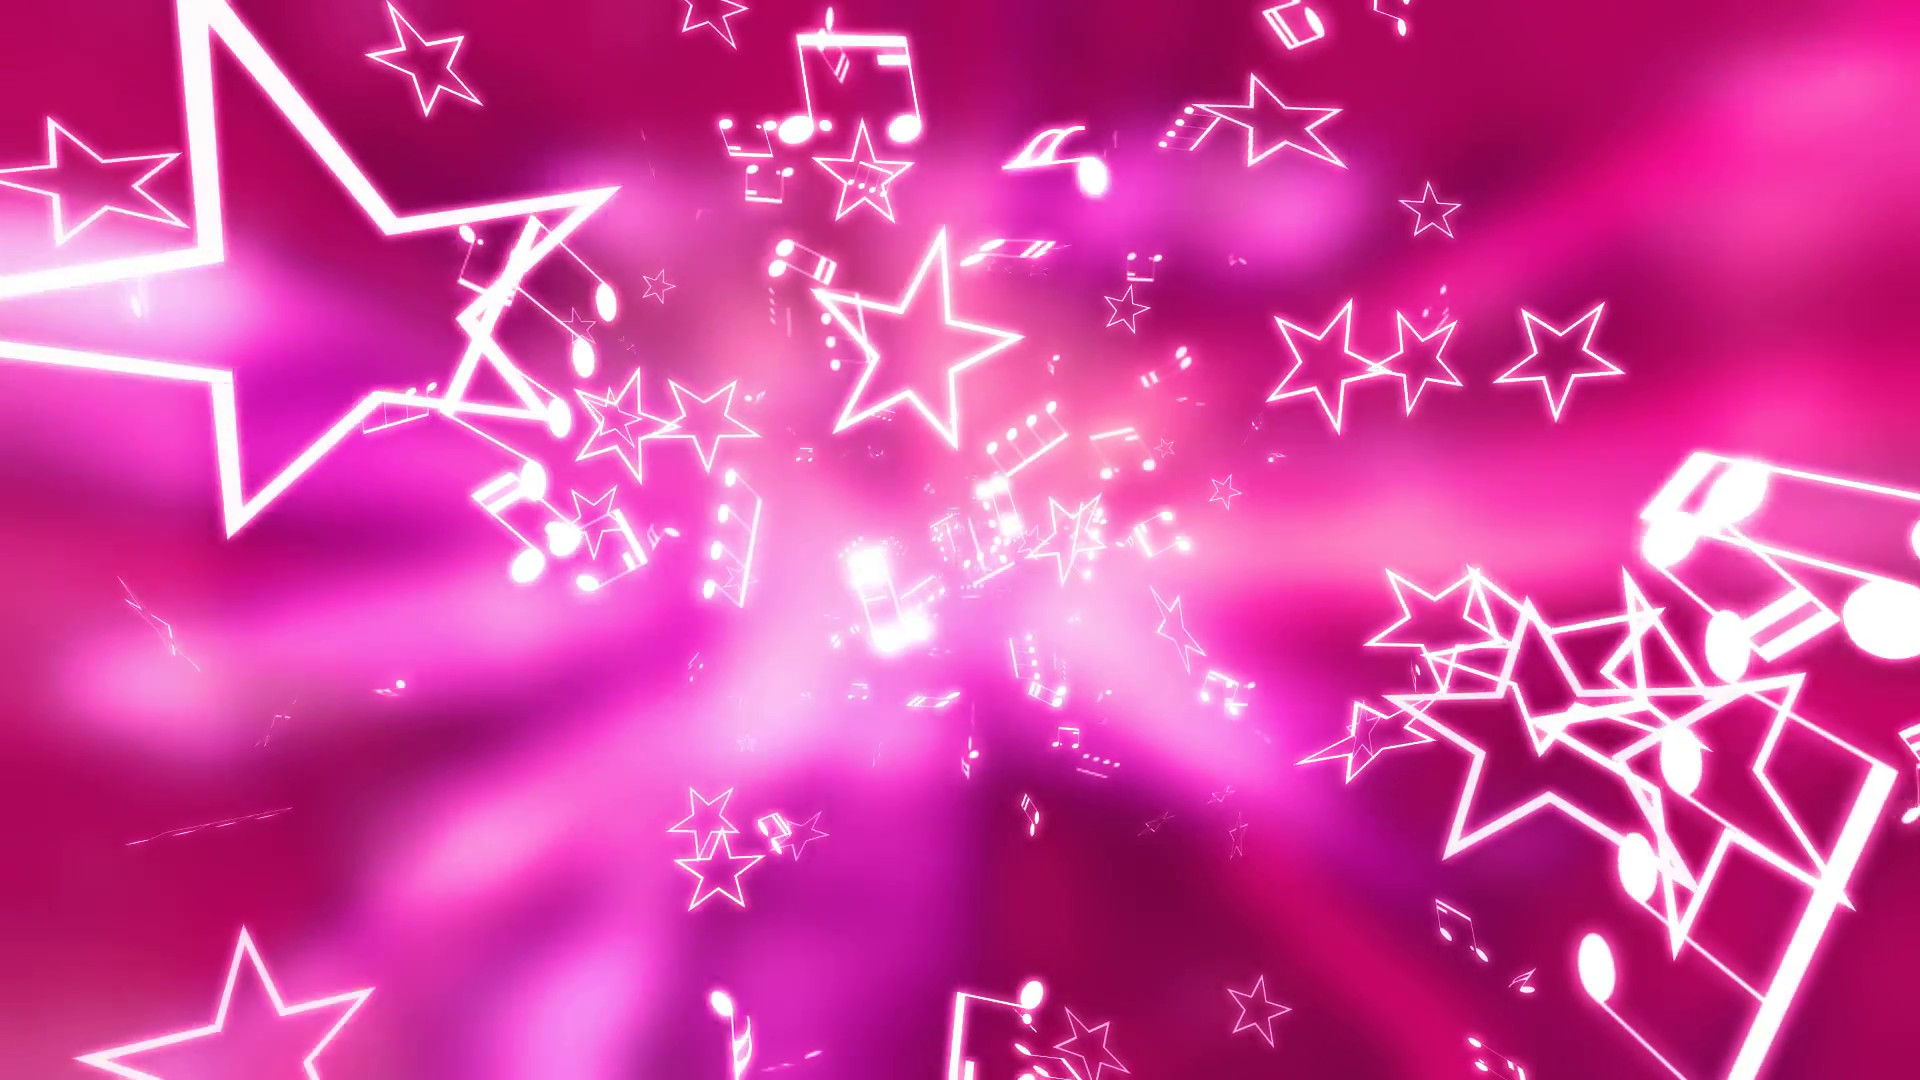 Download Free 100 + rock star background Wallpapers